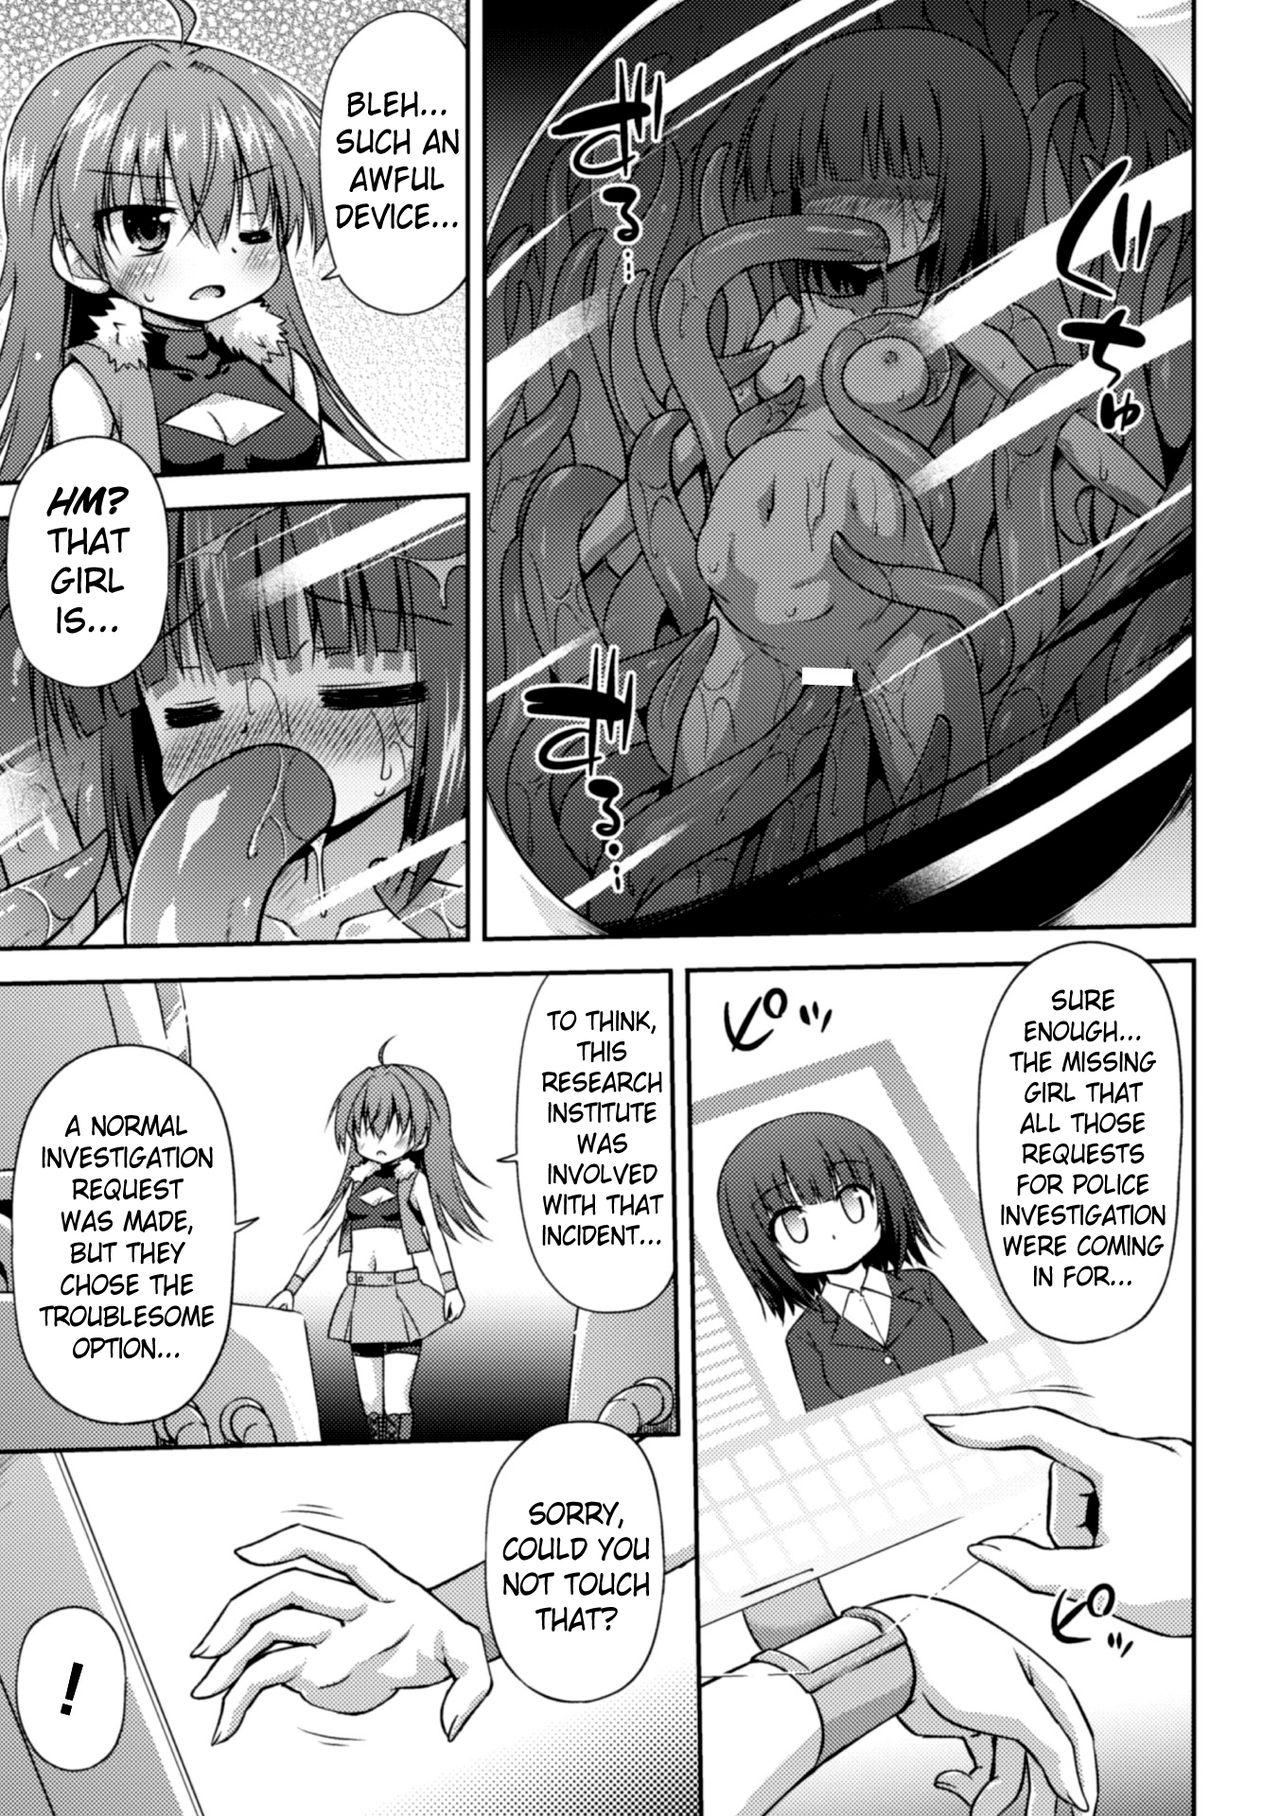 Gay Group This World is all Tentacles | Konoyo wa Subete Tentacle! Pure 18 - Page 7